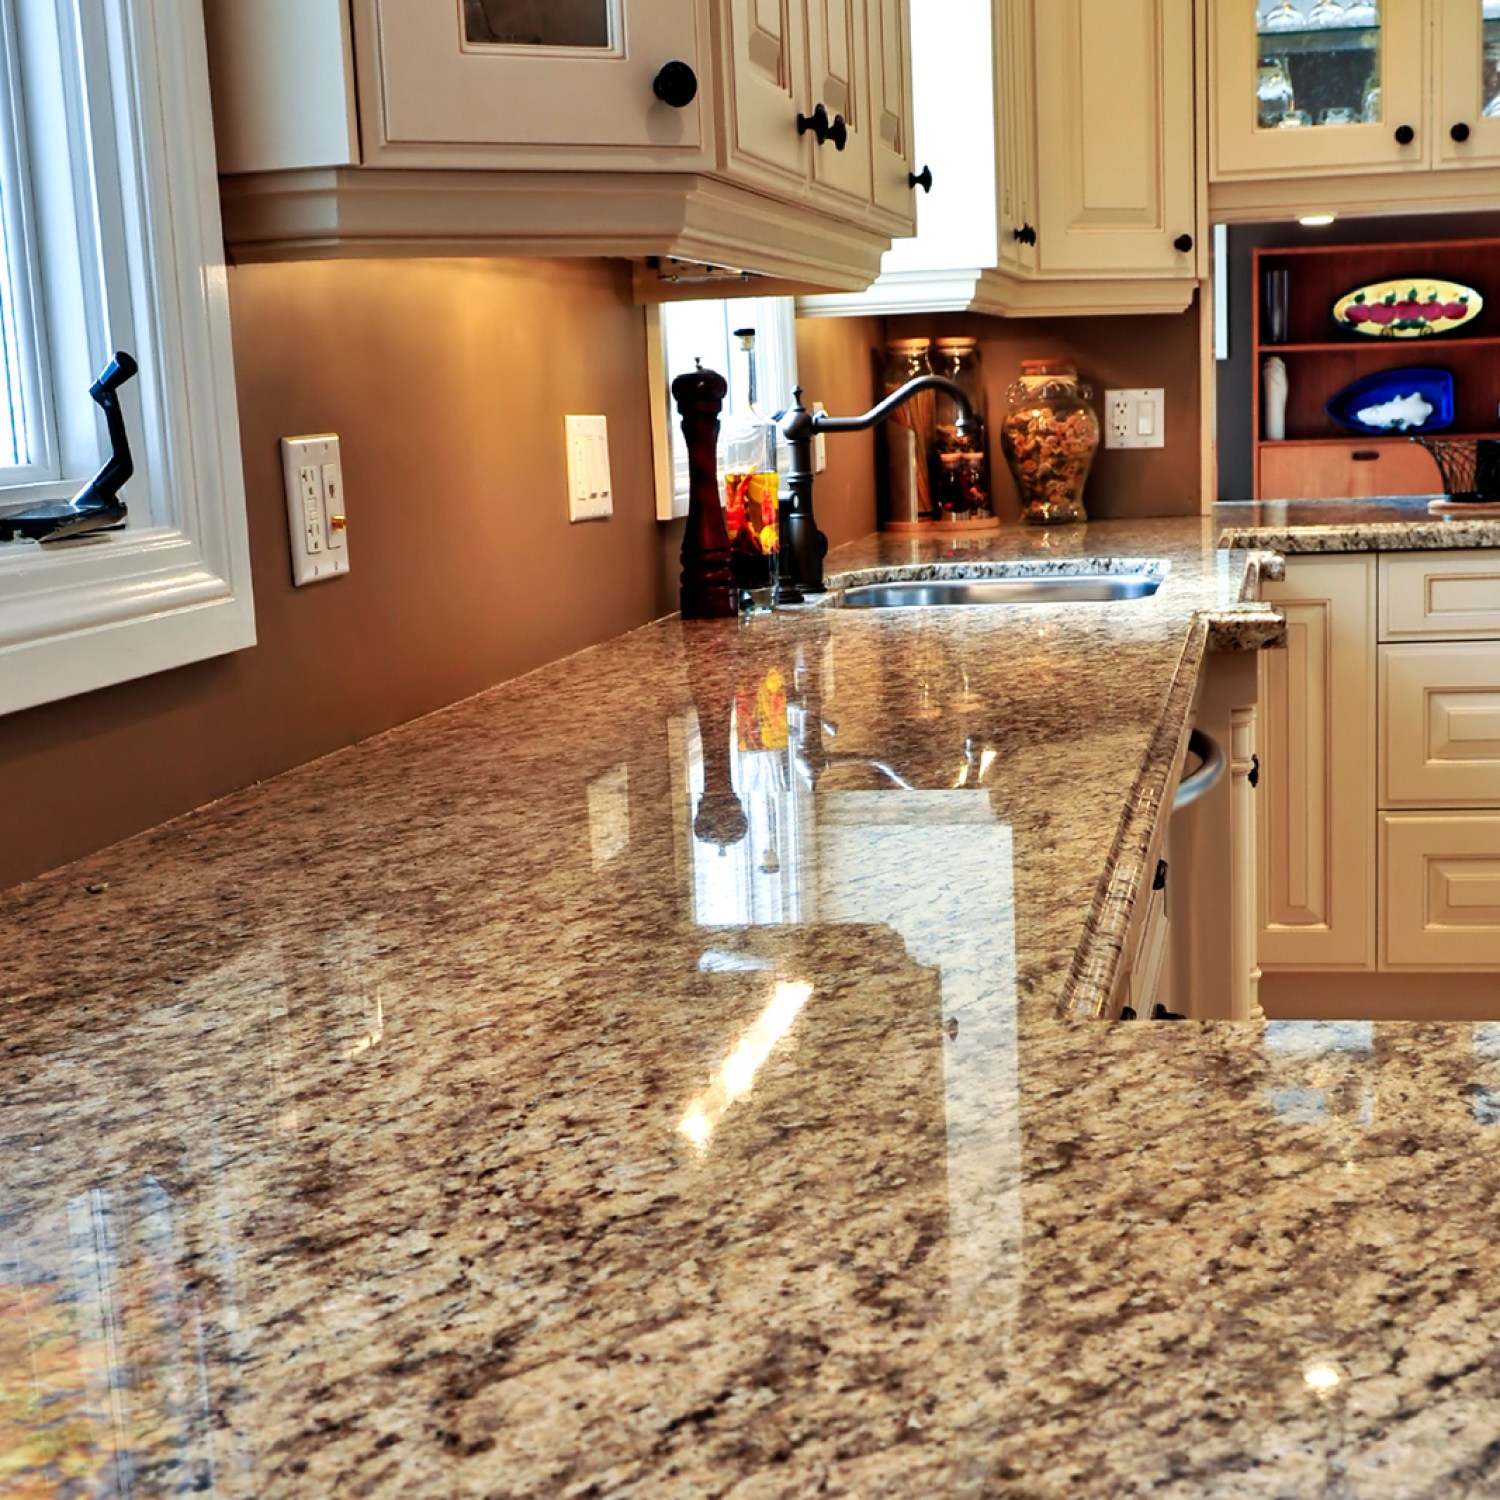 Repair Kitchen Countertop Scratches, How Much Does It Cost To Repair Laminate Countertop